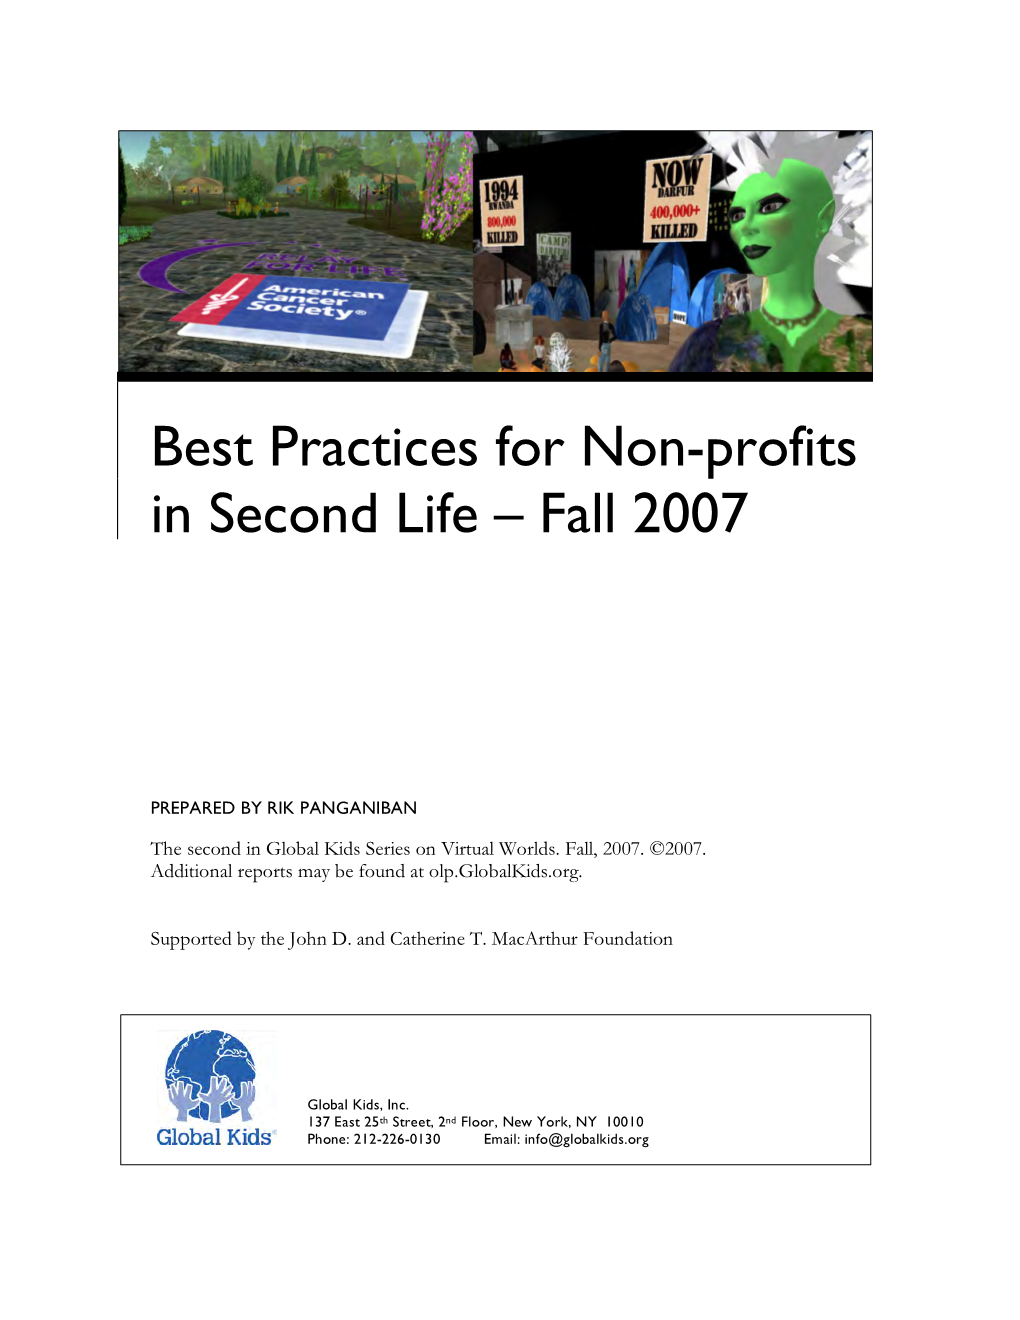 Best Practices for Non-Profits in Second Life 011508